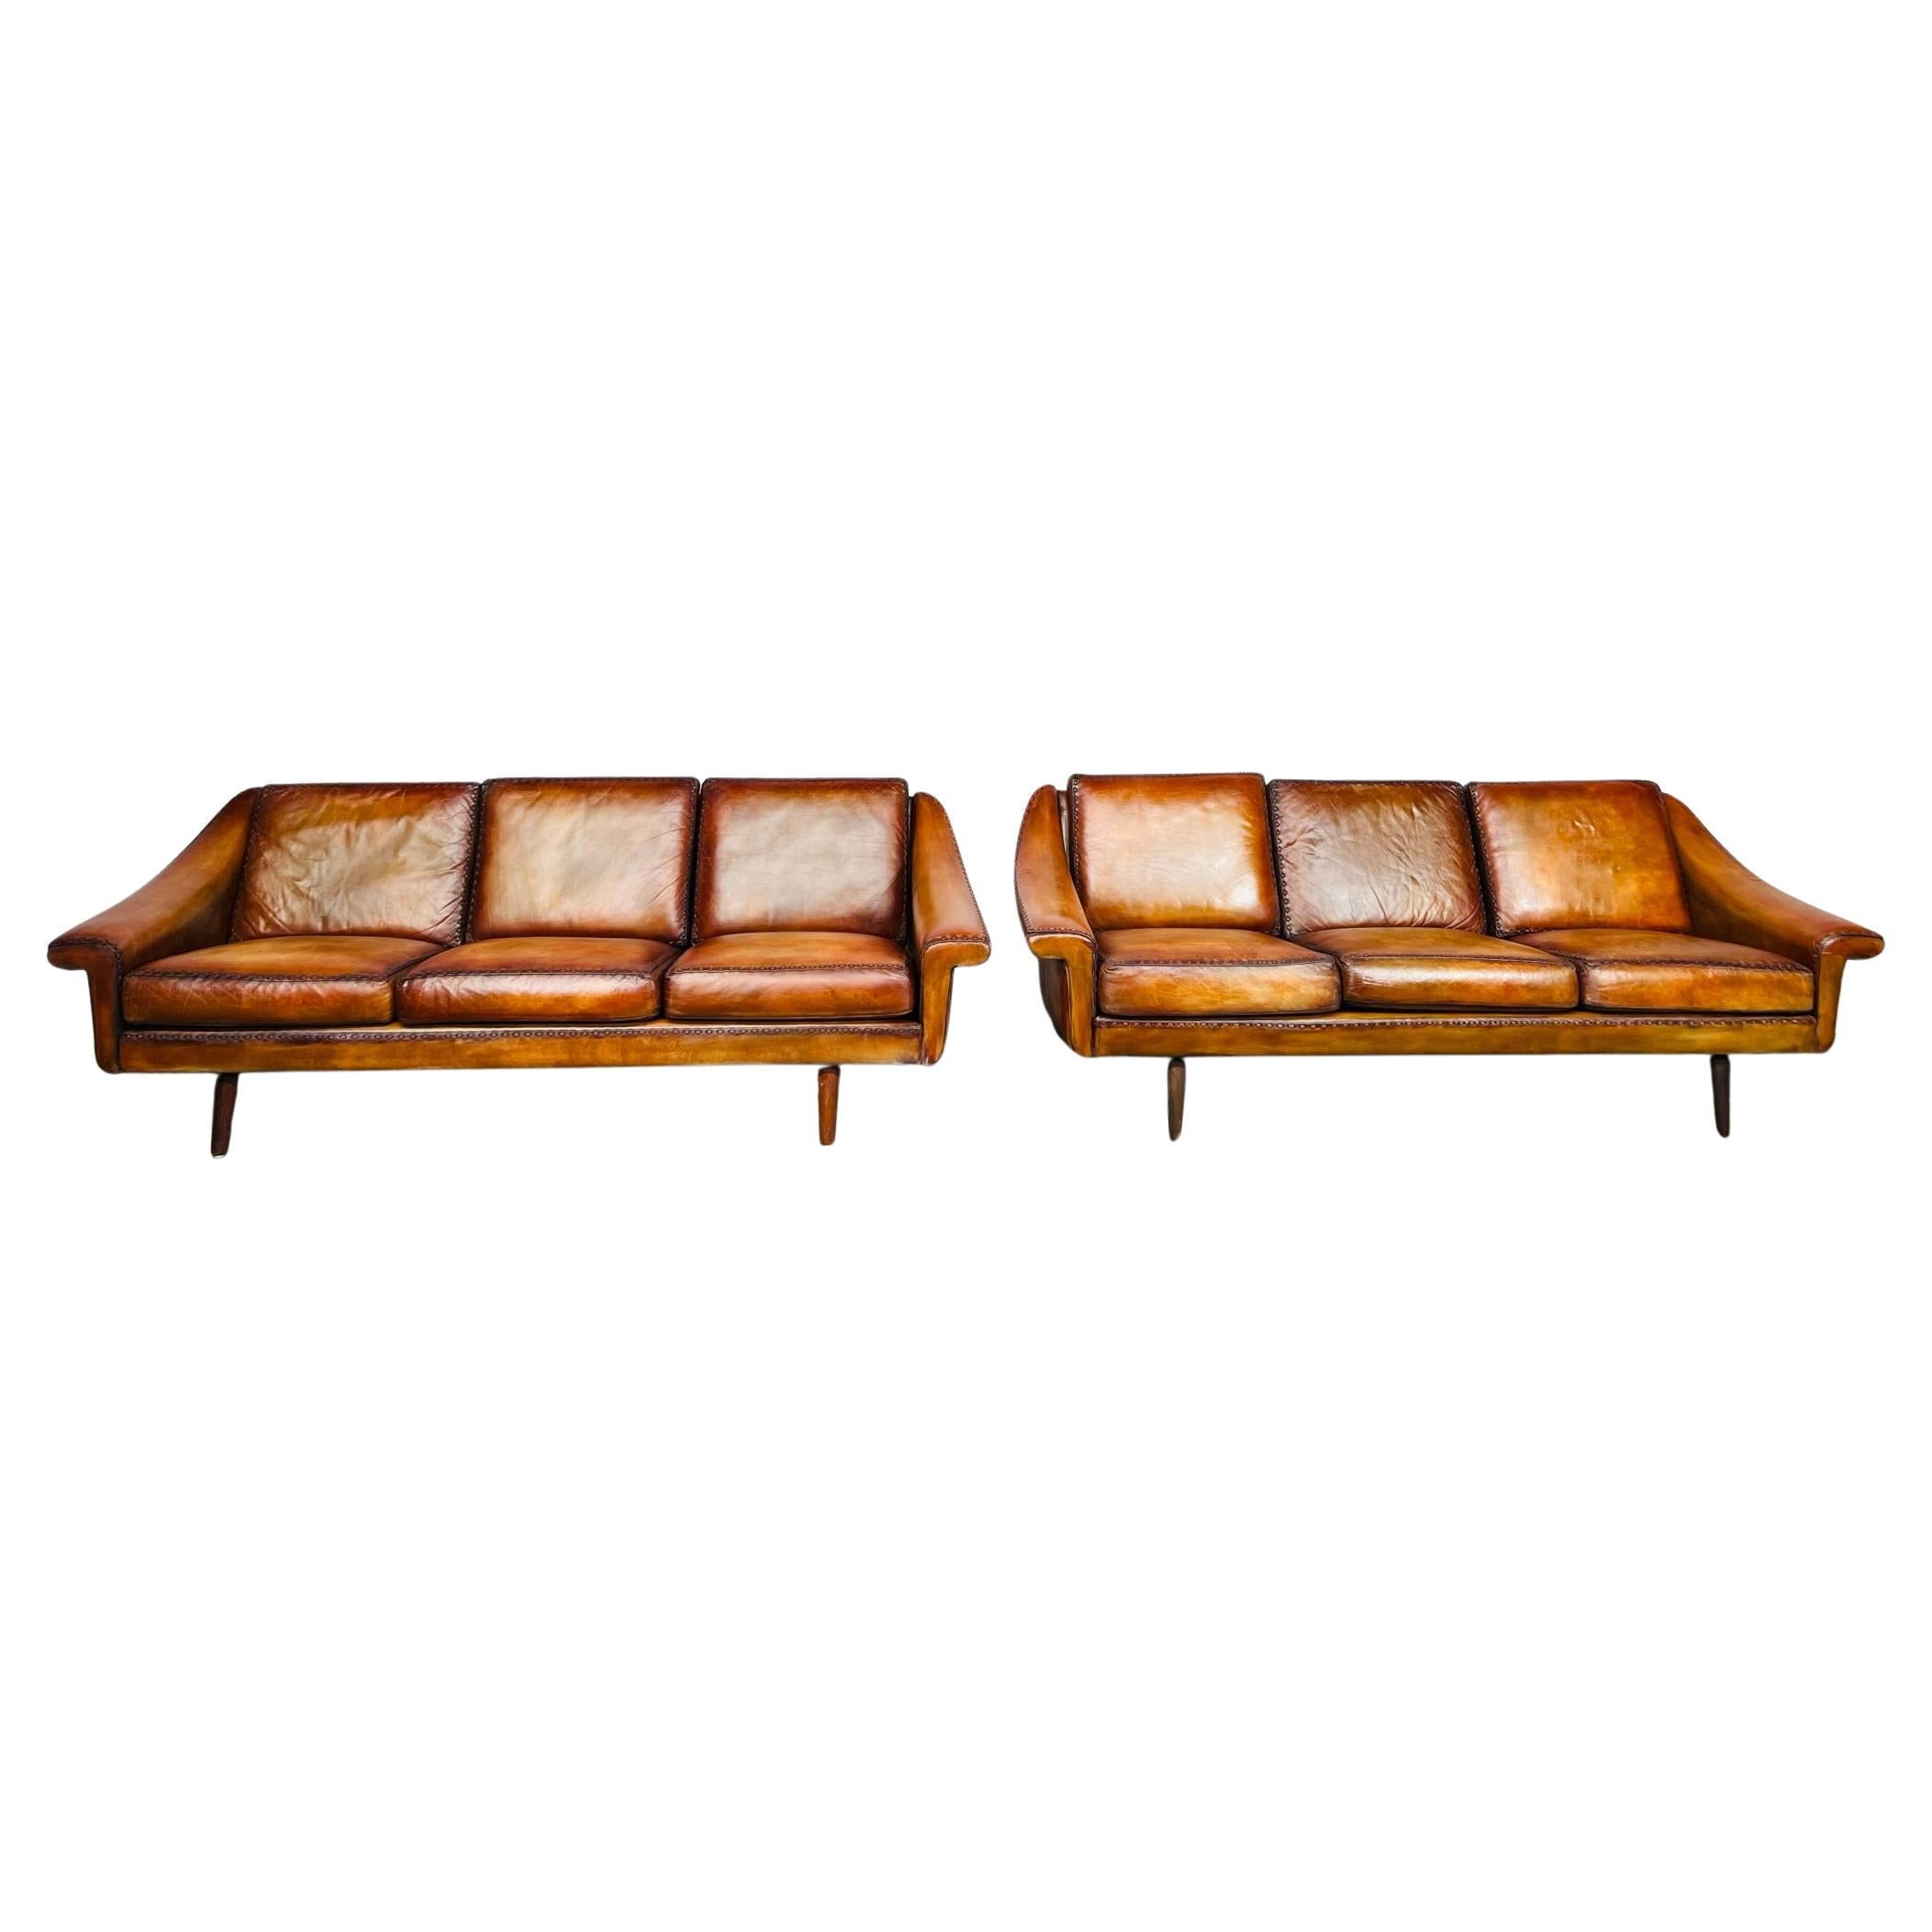 Pair Of Matador Leather 3 Seater Sofa by Aage Christiansen for Eran 1960s #642